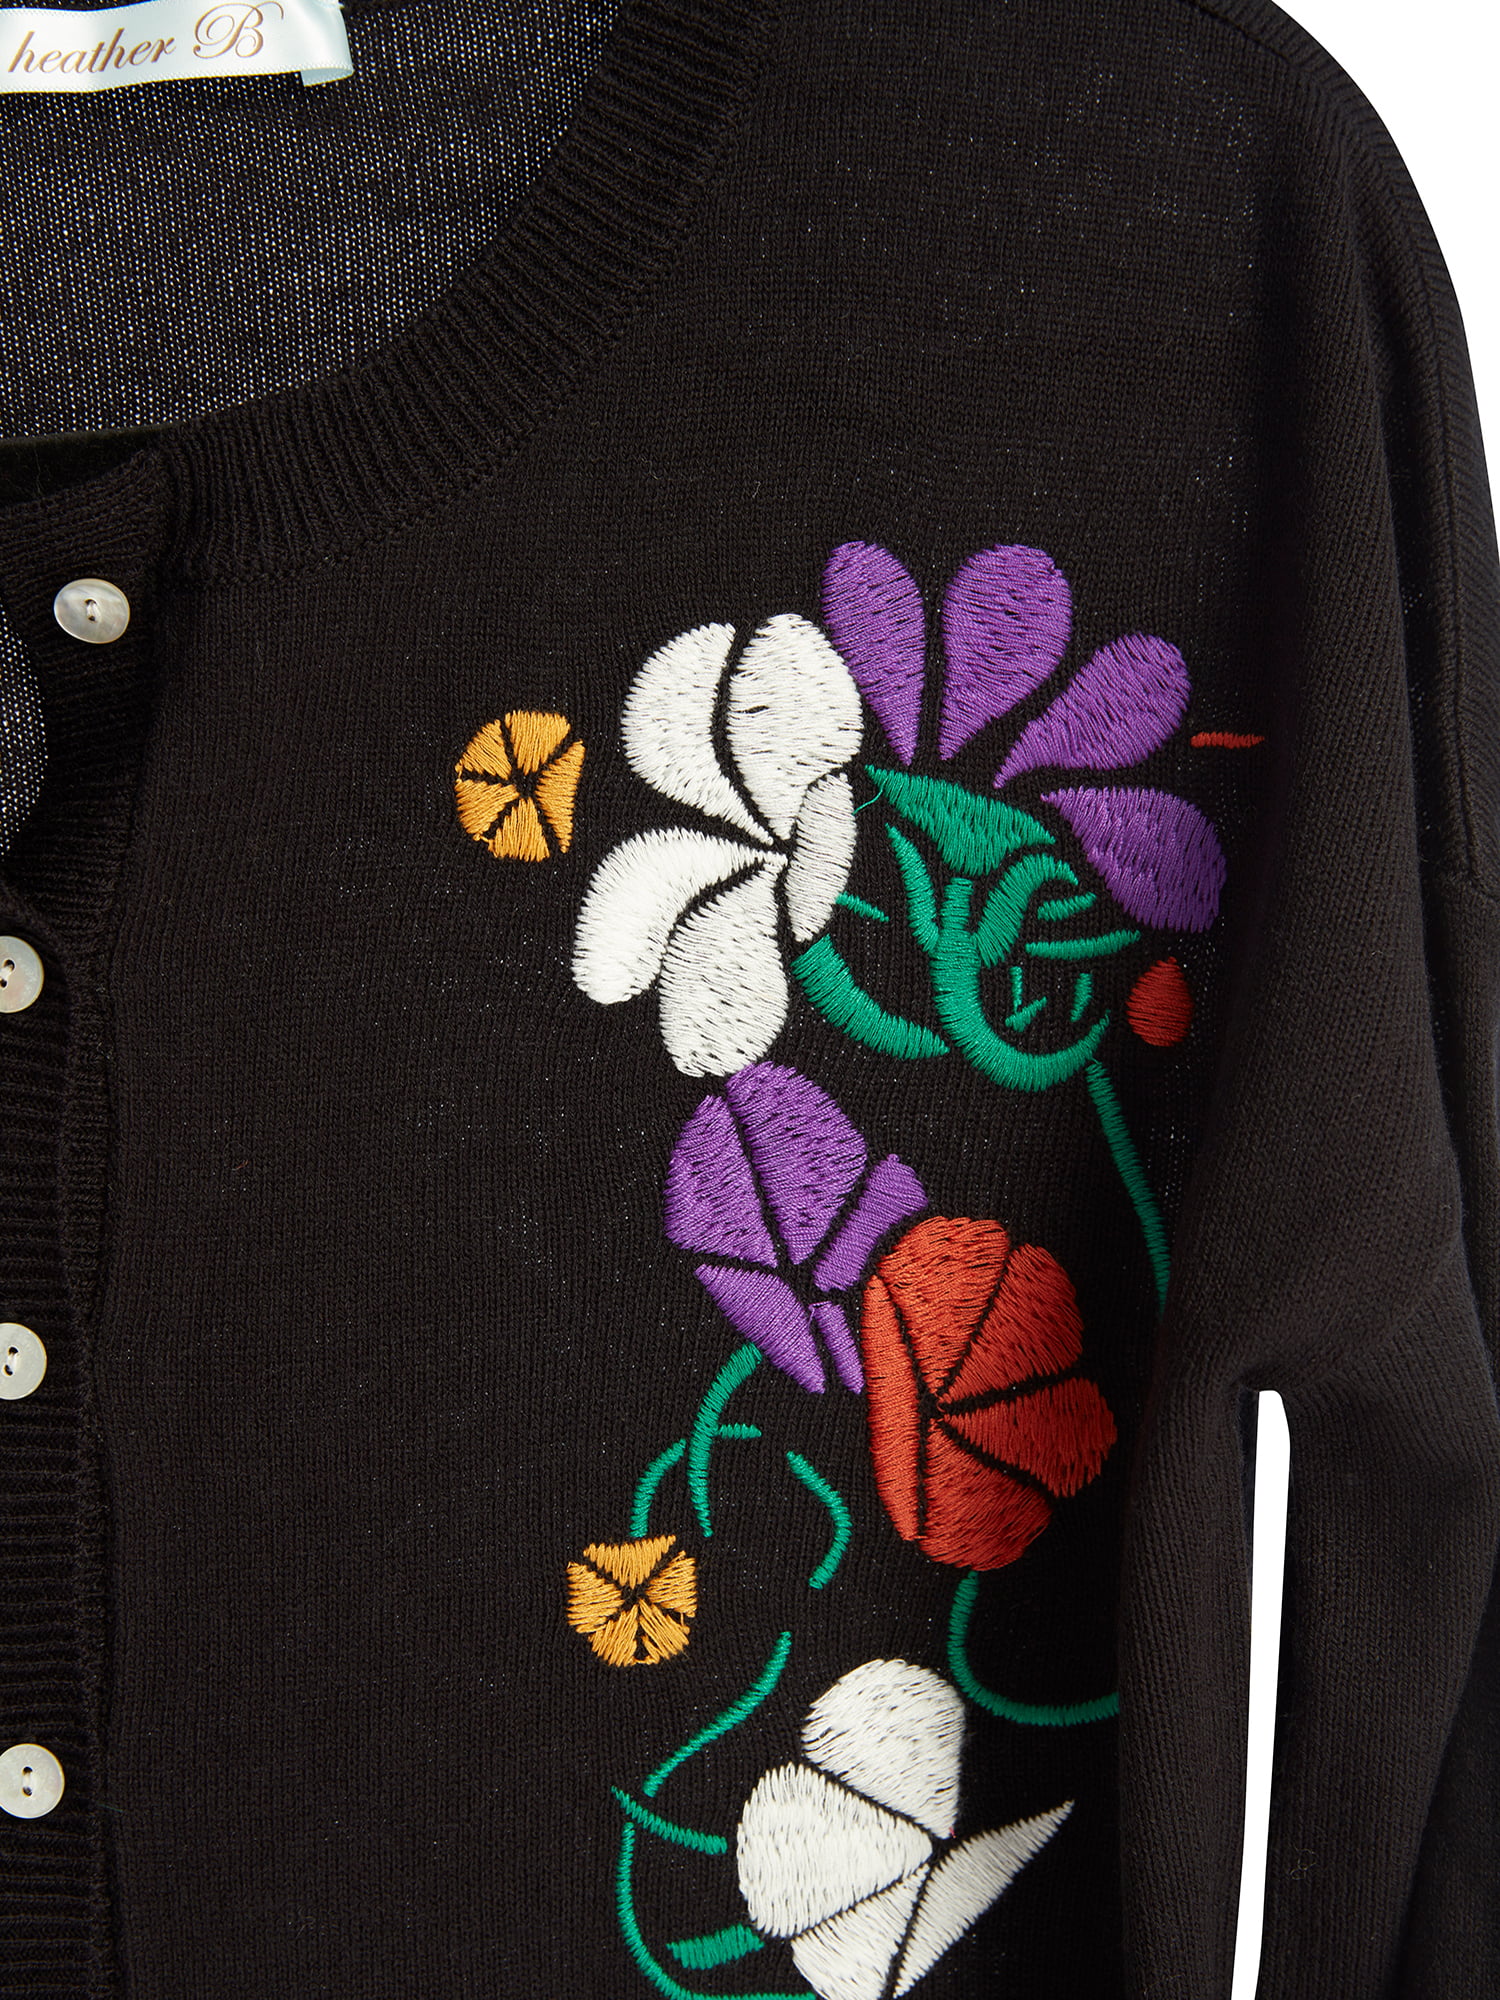 Heather B Womens Floral Embroidered Cardigan